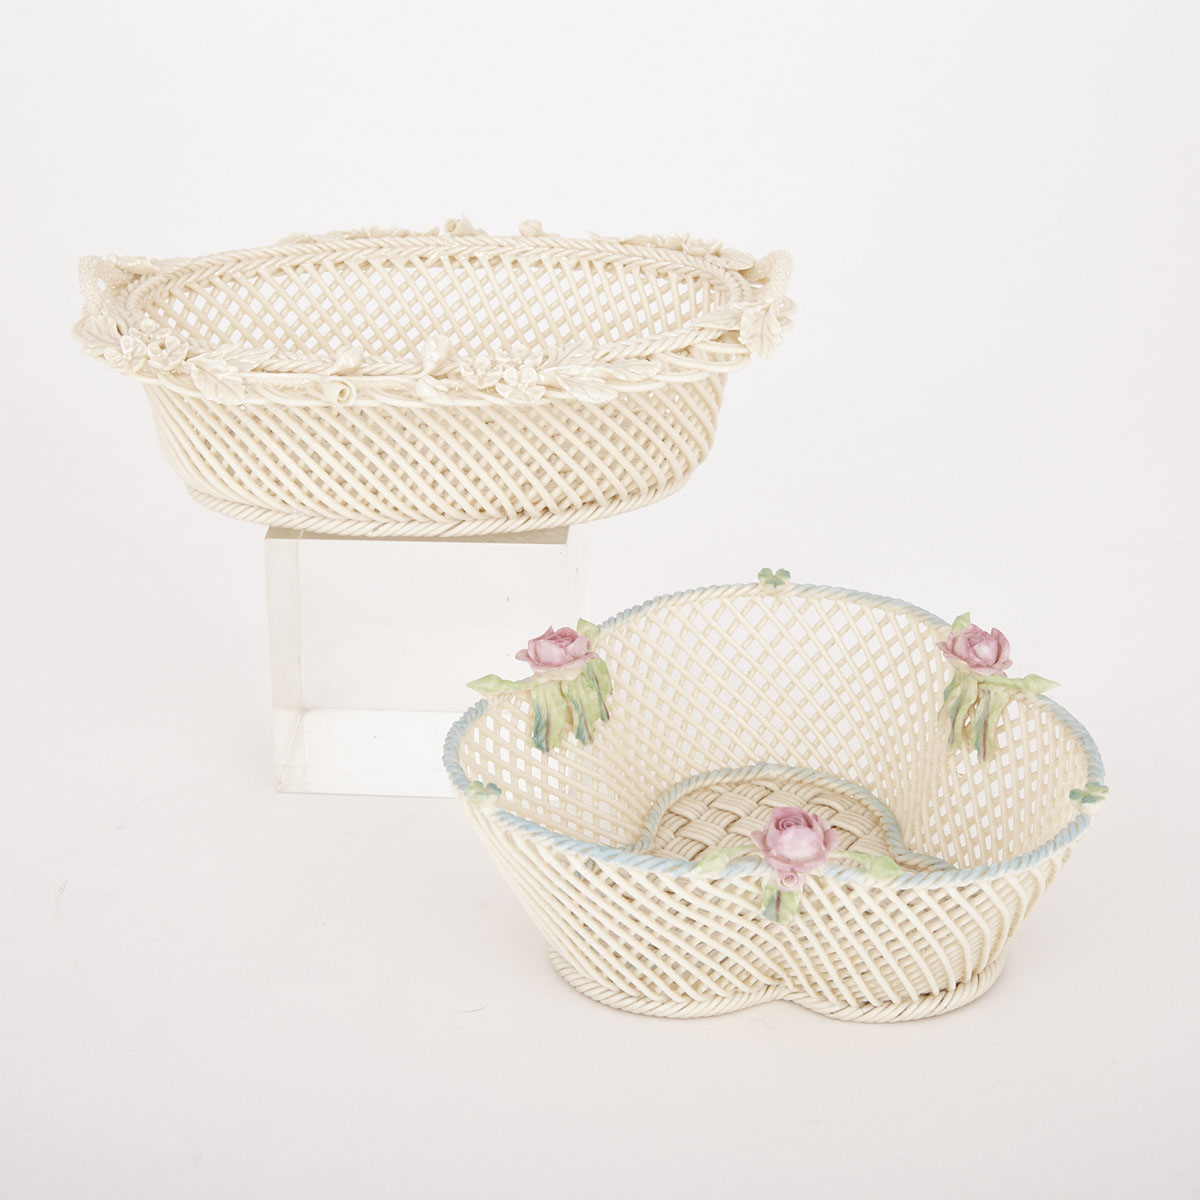 Two Belleek Reticulated Baskets, 20th century